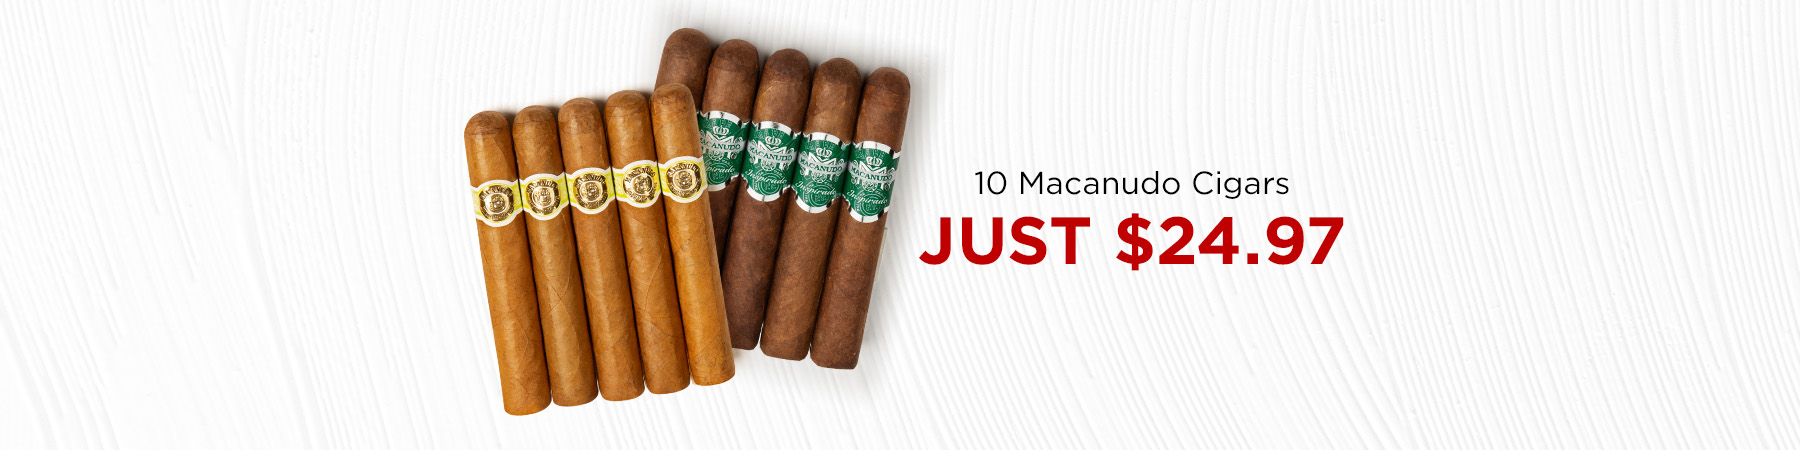 10 macanudo cigars only $24.97